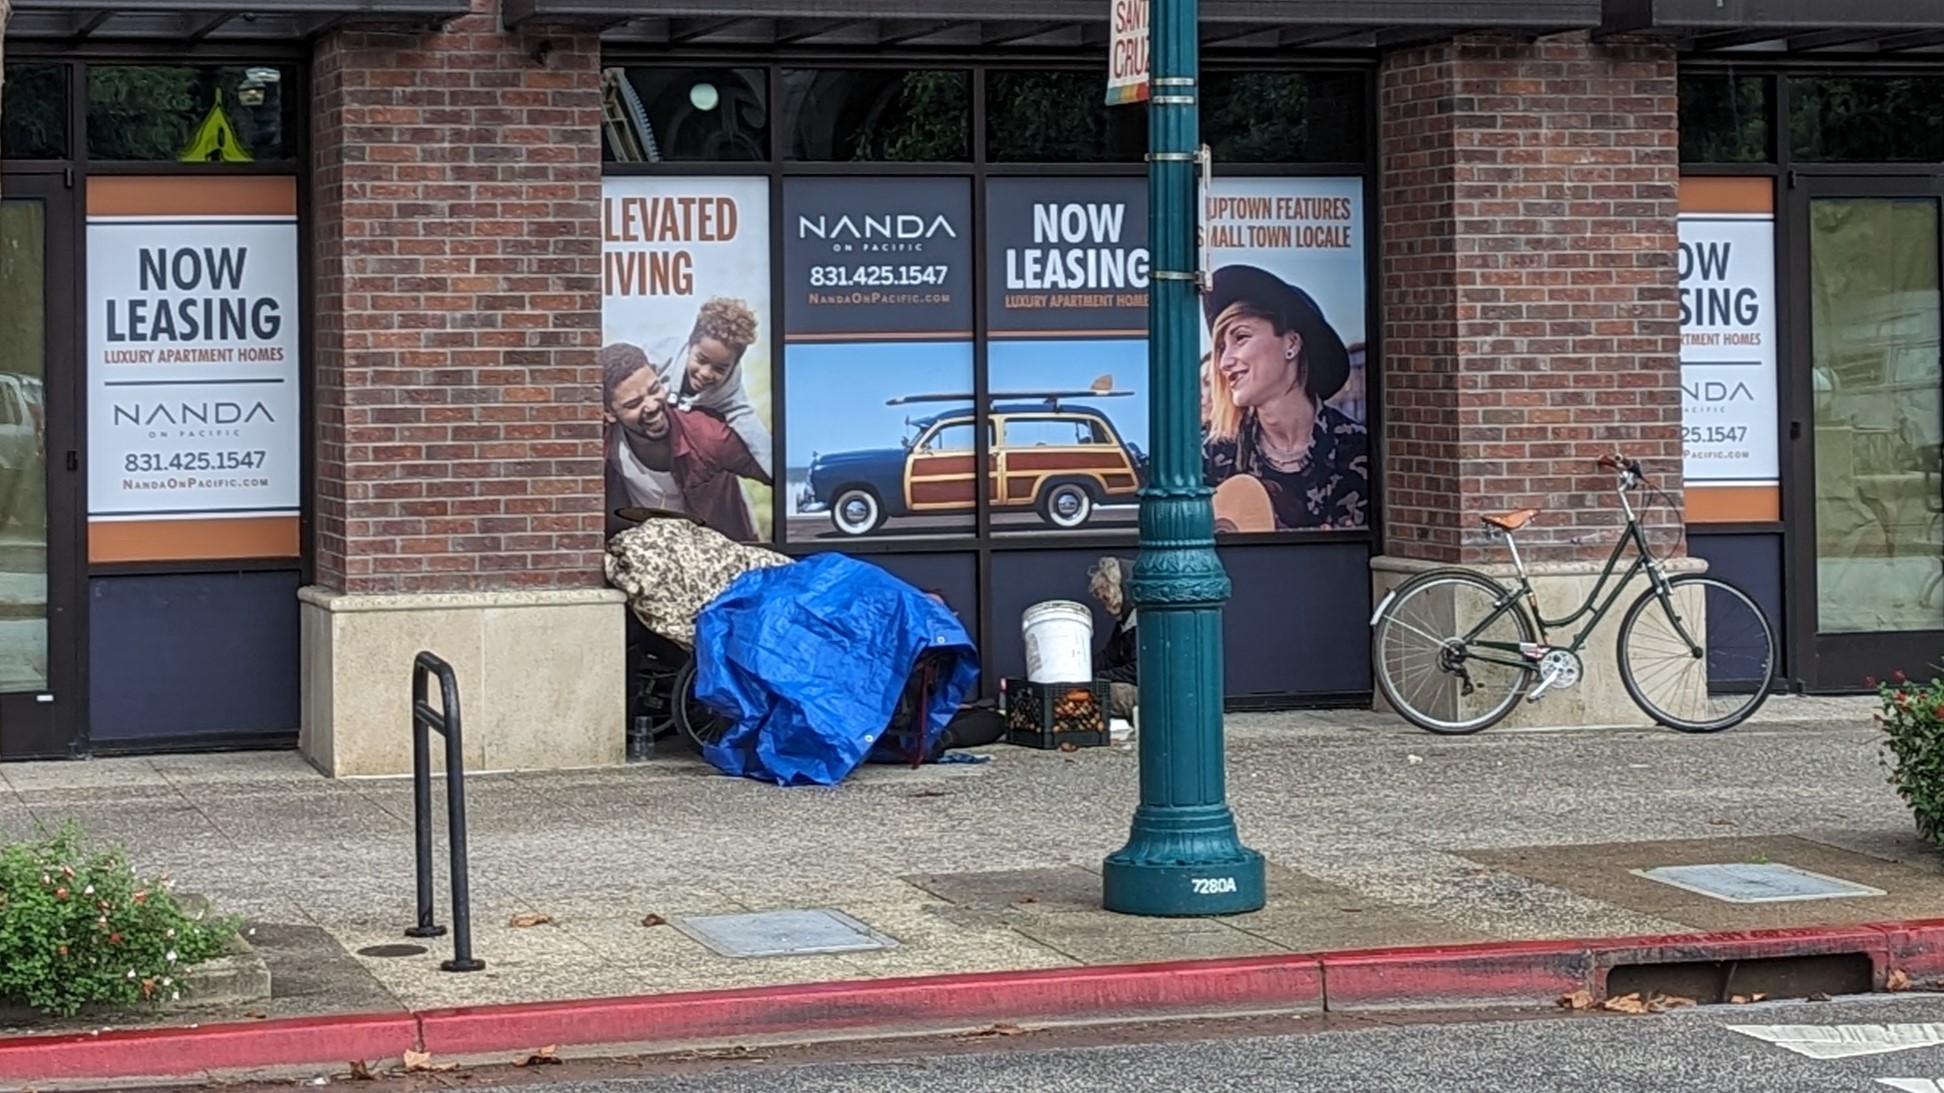 A photo showing a tarp set up on a sidewalk, under the overhang of building. The building's windows are covered in advertisements for housing that say "Now Leasing."